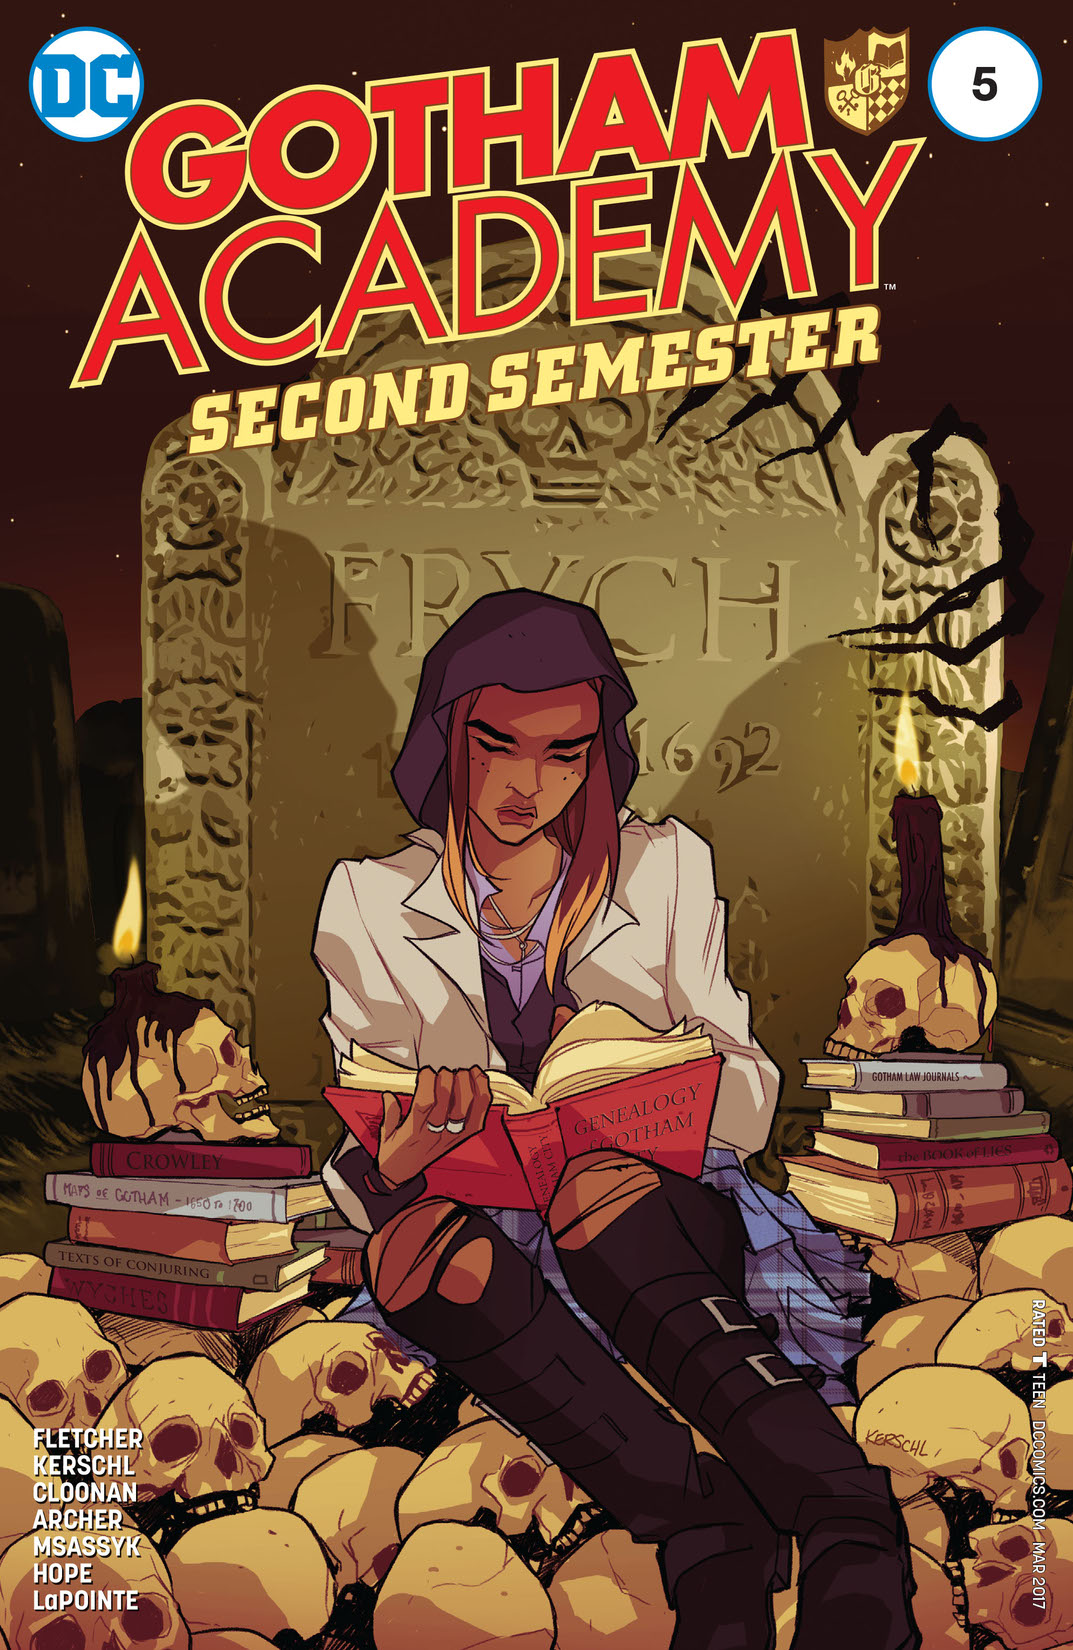 Gotham Academy: Second Semester #5 preview images